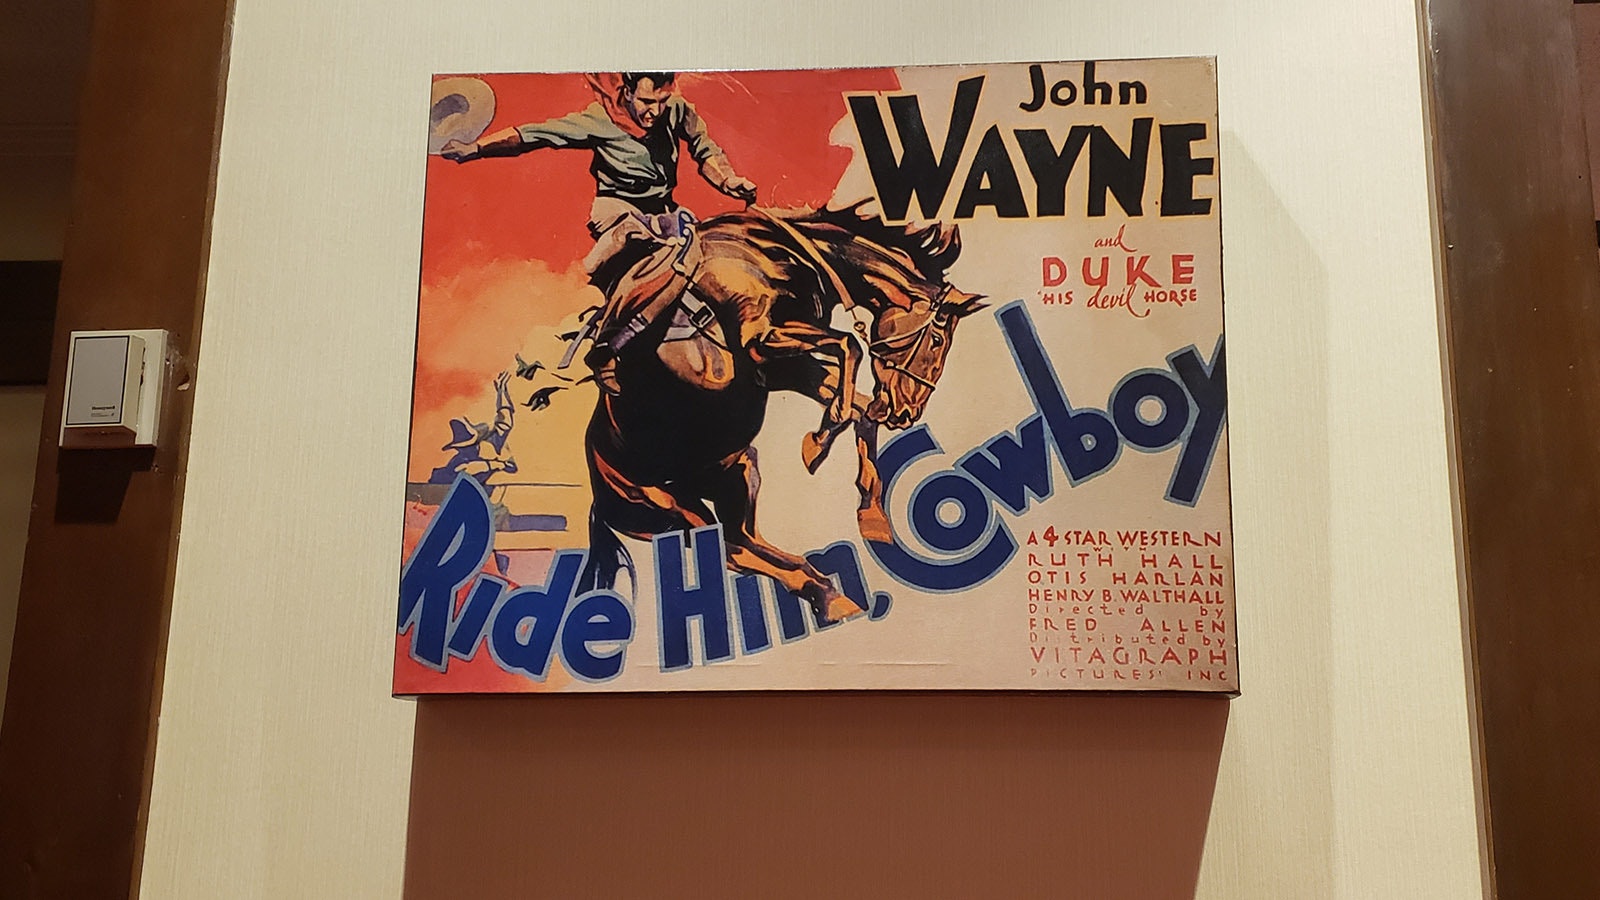 John Wayne is among the billboards hanging on the walls at Little America.